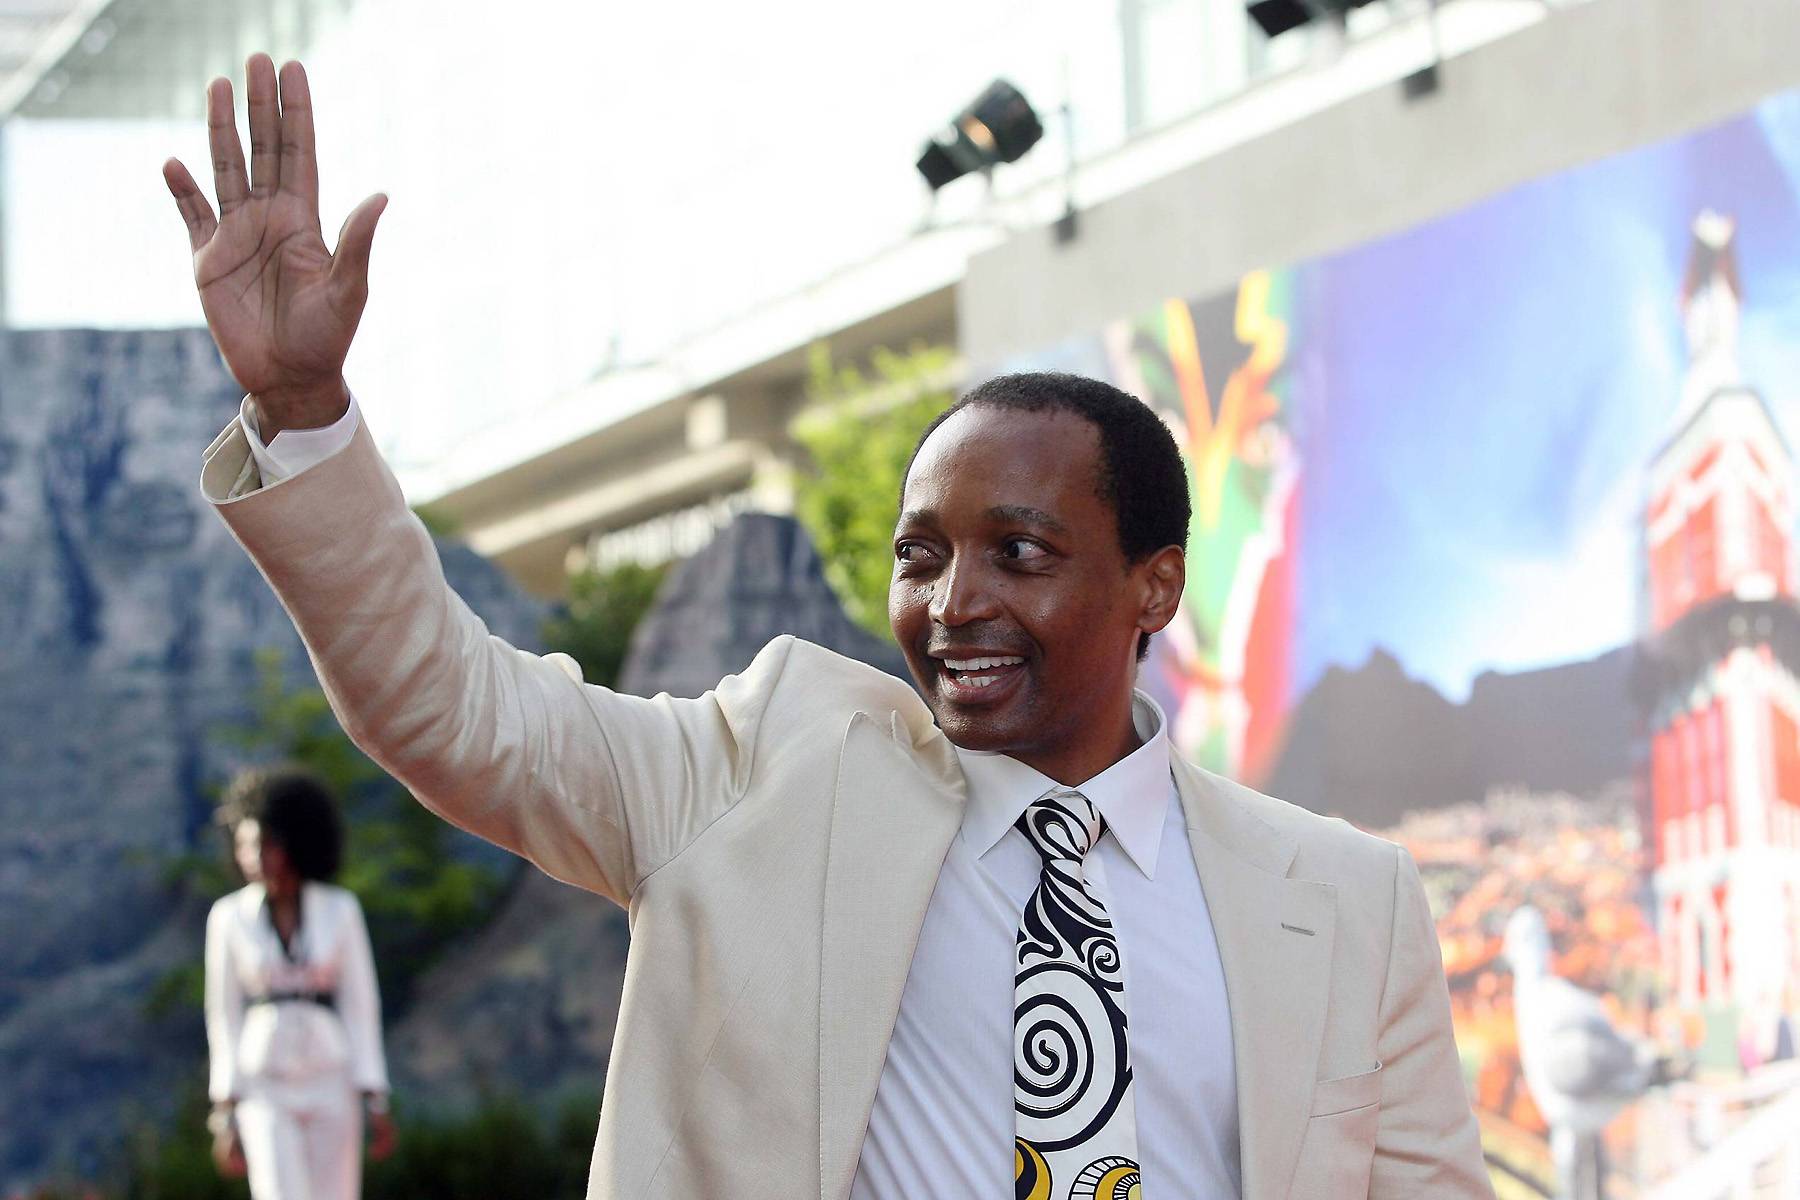 Patrice Motsepe, South Africa — $2.9 billion - Motsepe is South Africa’s first and only Black billionaire, earning his fortune by building African Rainbow Minerals (ARM), which has interests in mining platinum, nickel, chrome, iron, manganese, coal, copper and gold.In January 2013, Motsepe announced he will give away half the income generated from assets owned by his family to the Motsepe Family Foundation.(Photo: 2010 FIFA World Cup Organising Committee South Africa)